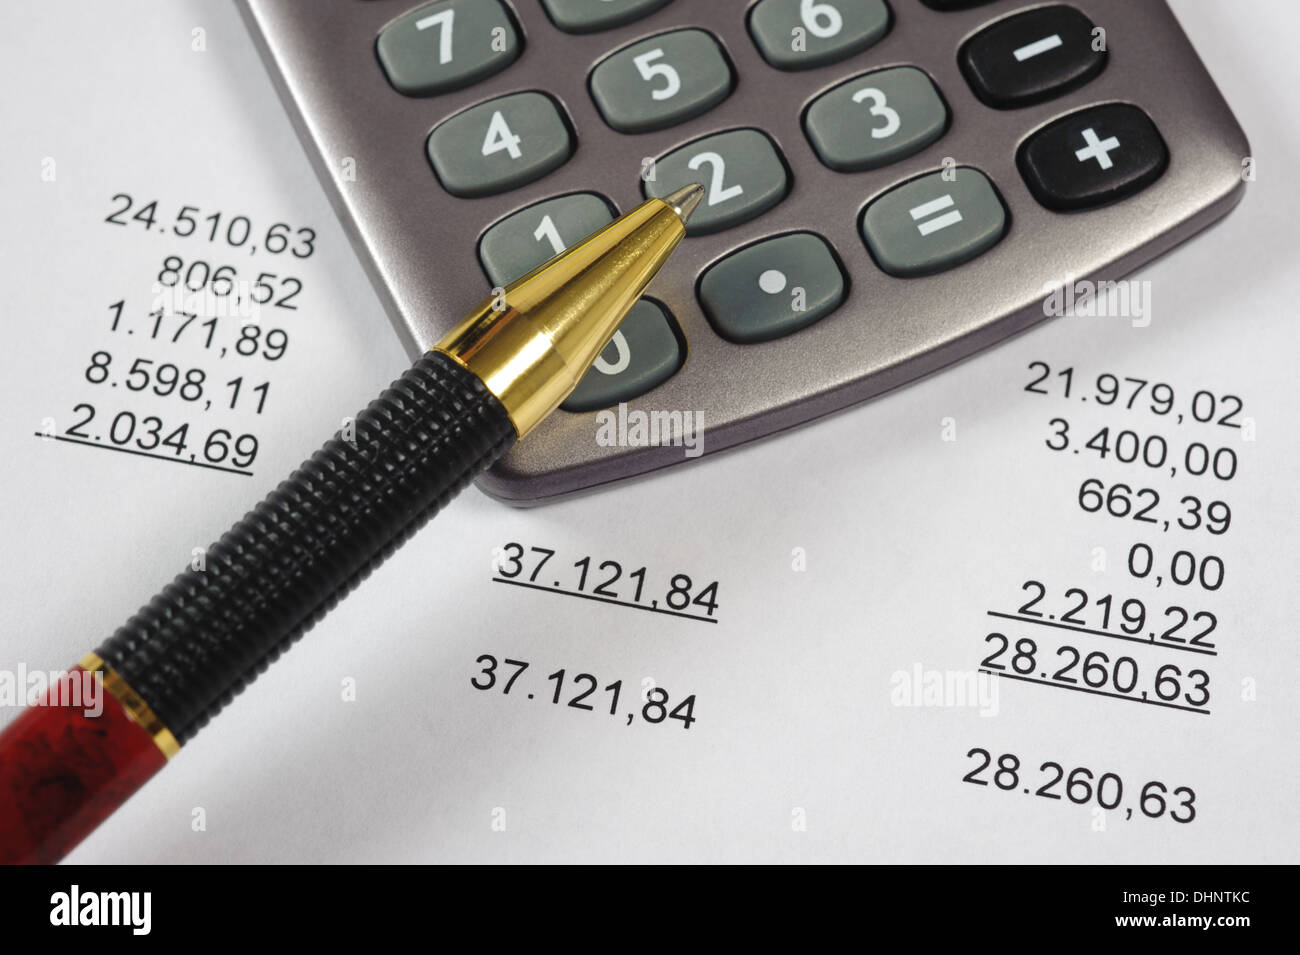 business account with calculator and pen Stock Photo